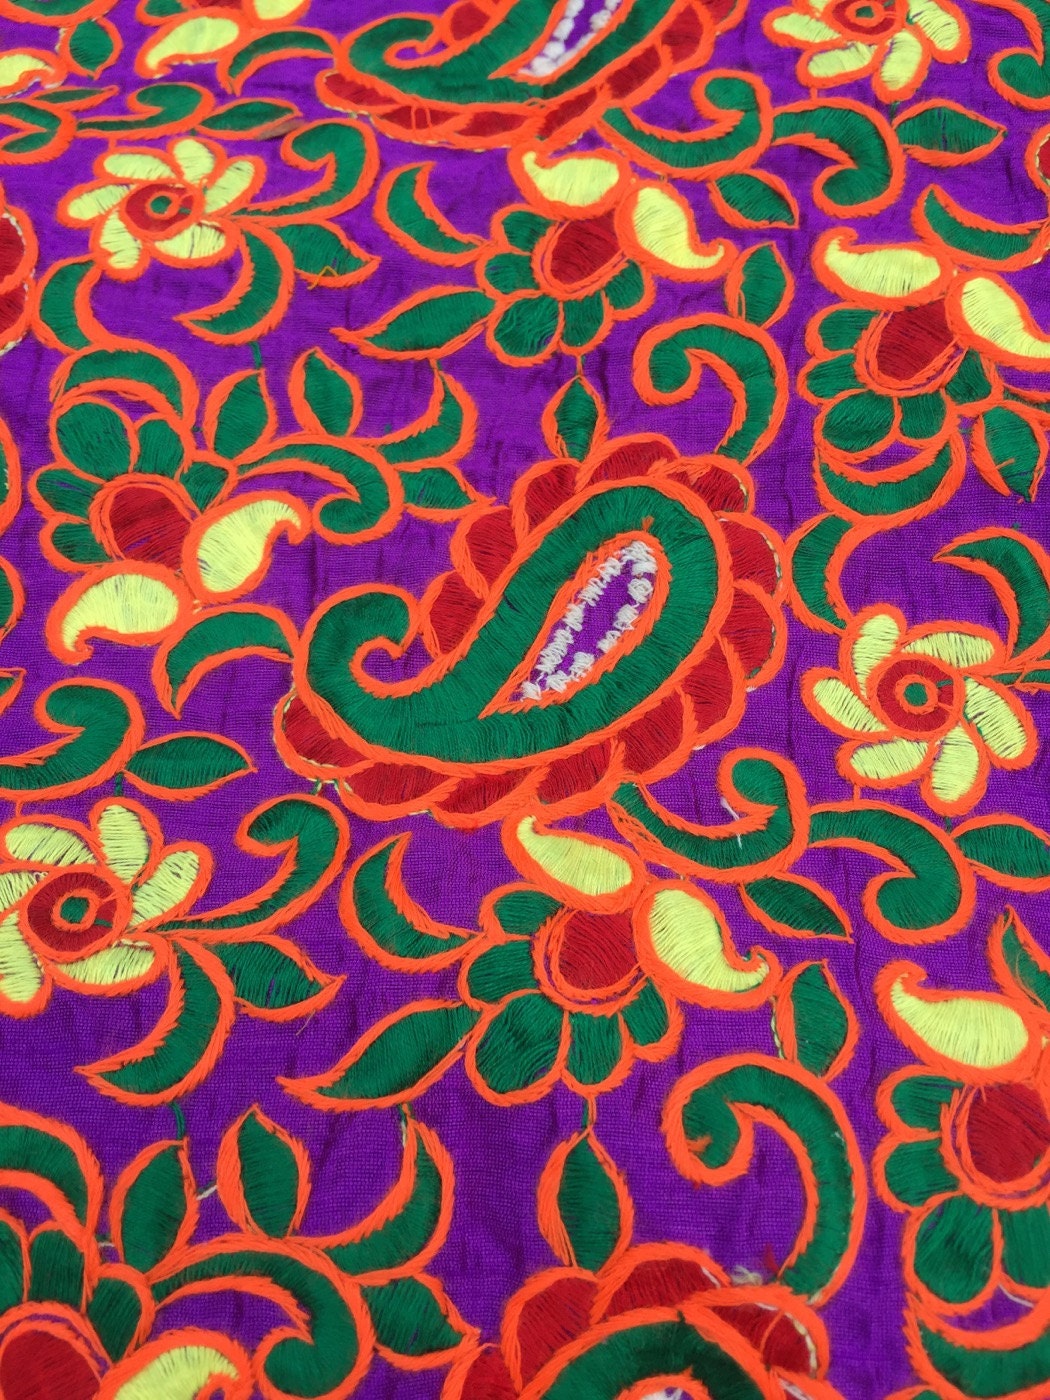 Purple Floral Embroidered Silk Fabric from Rajasthan India